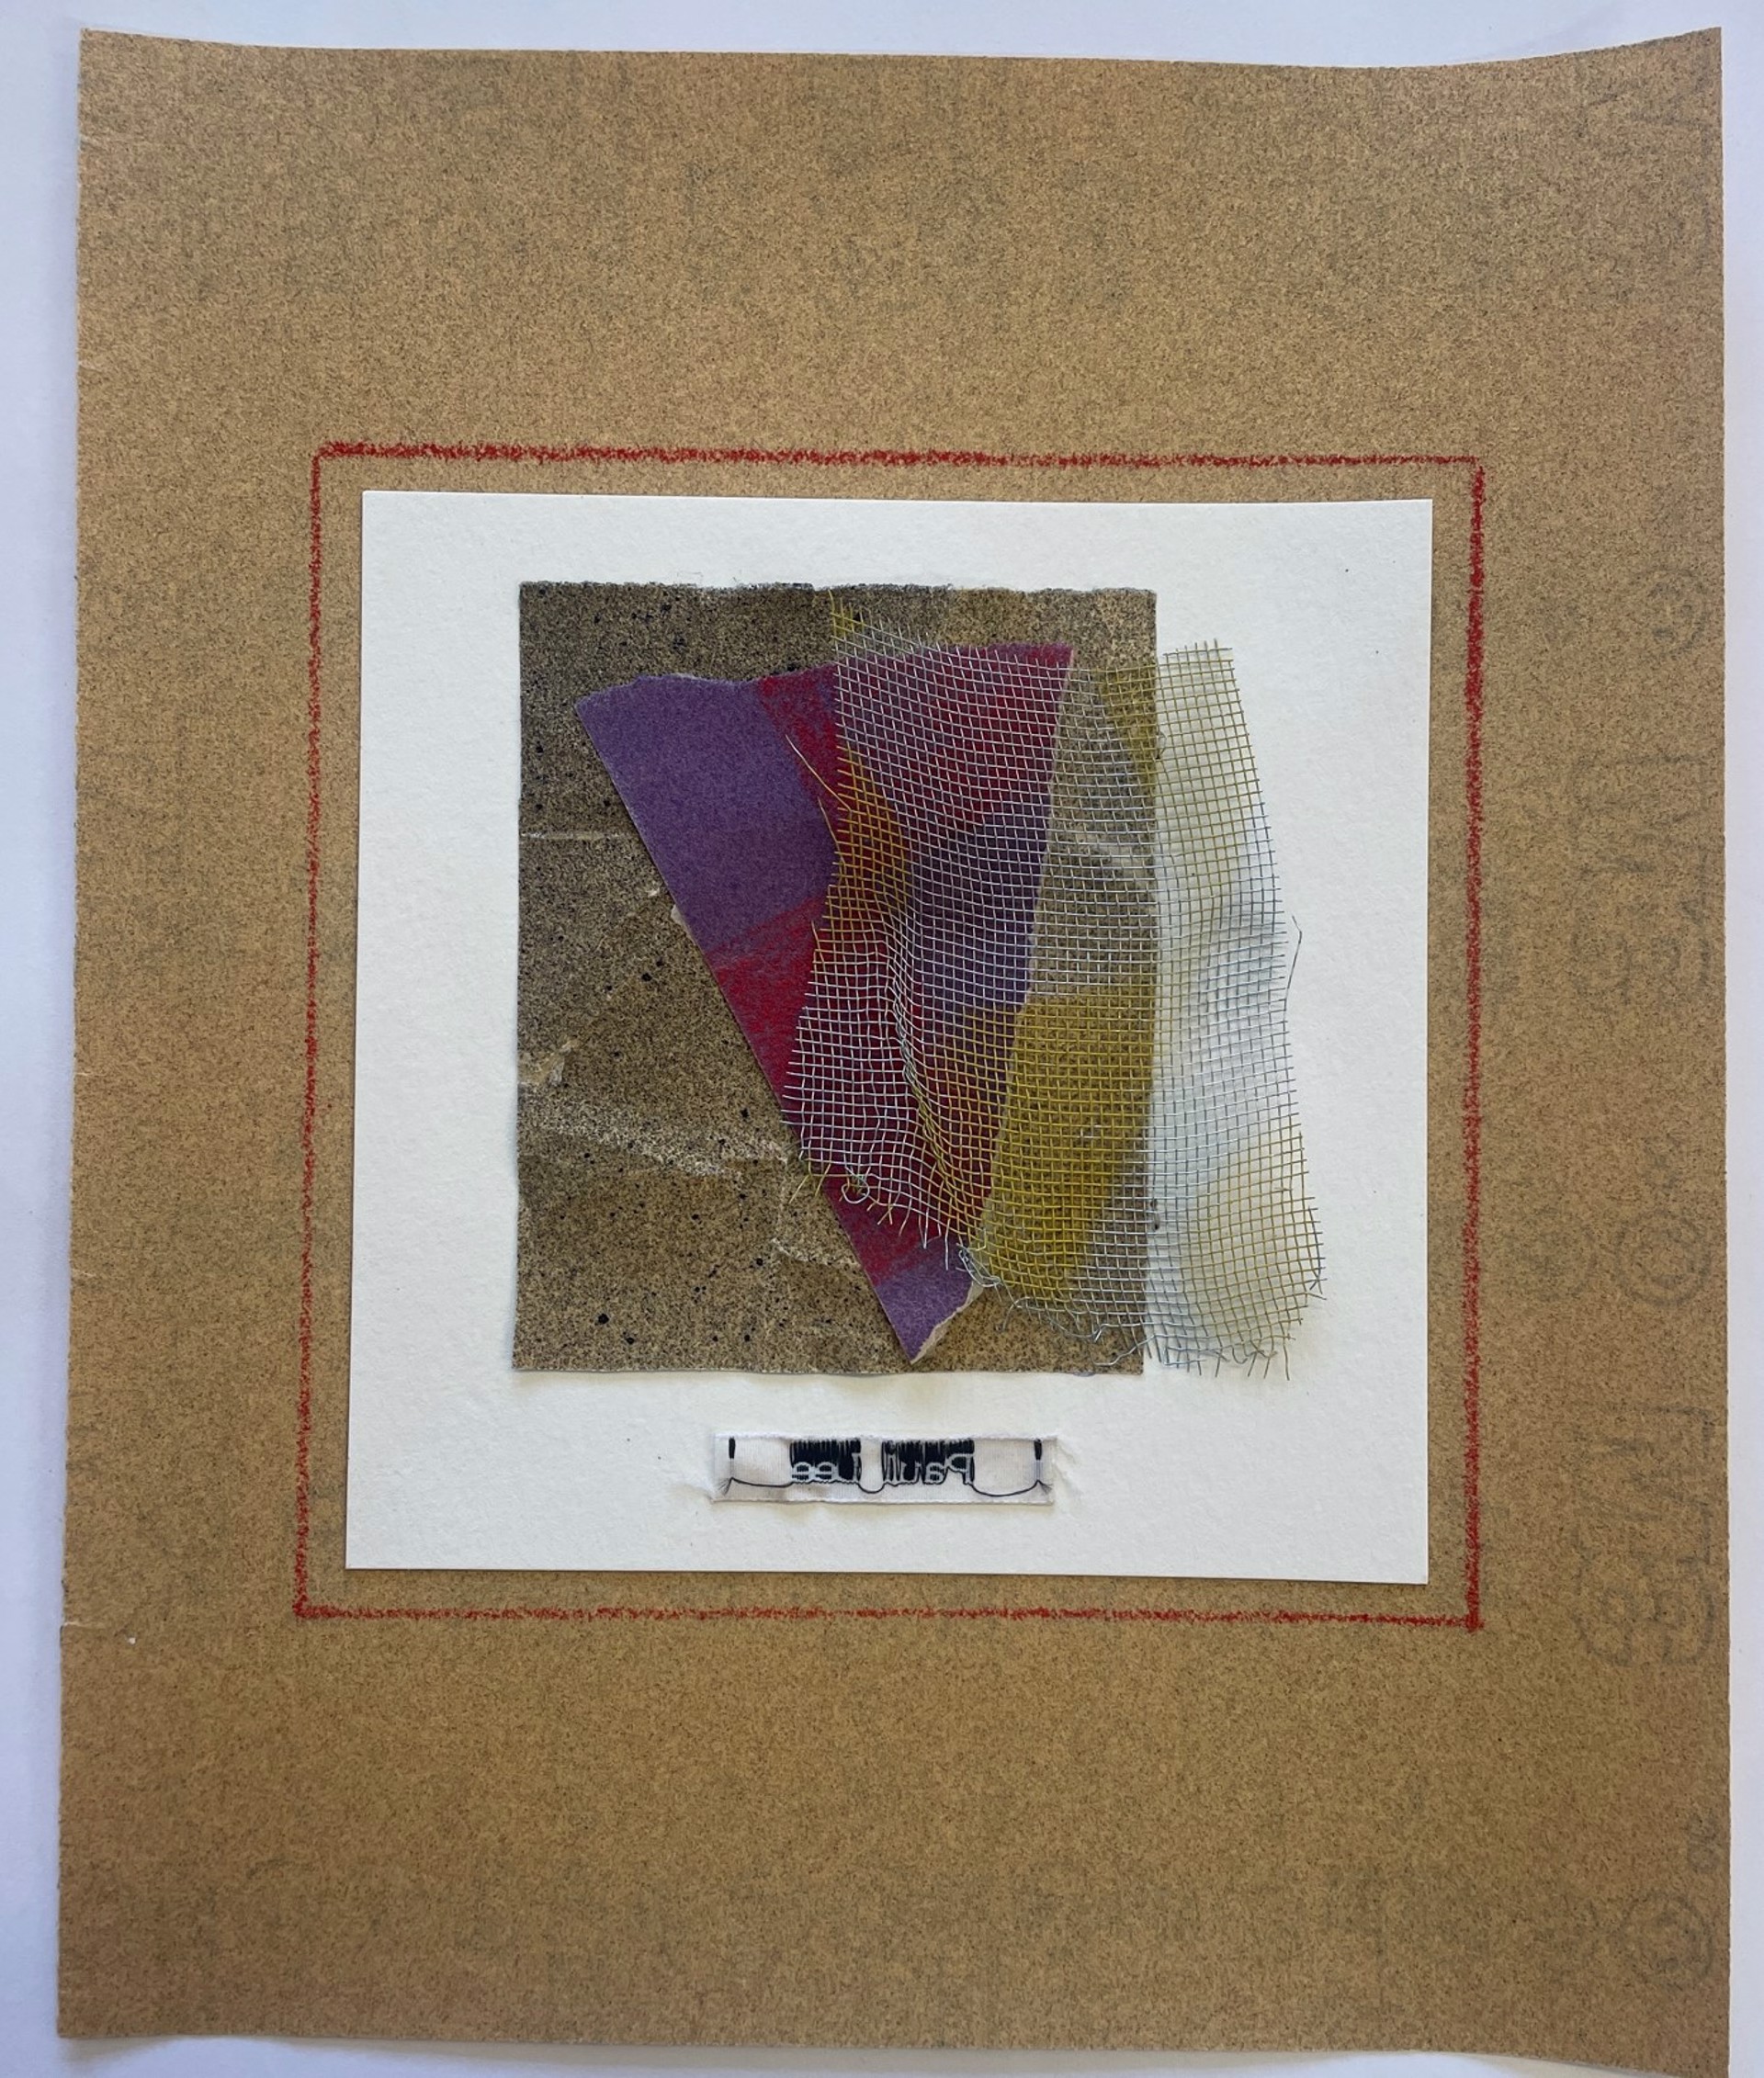 Sandpaper Collage No. 2 by Paul Lee